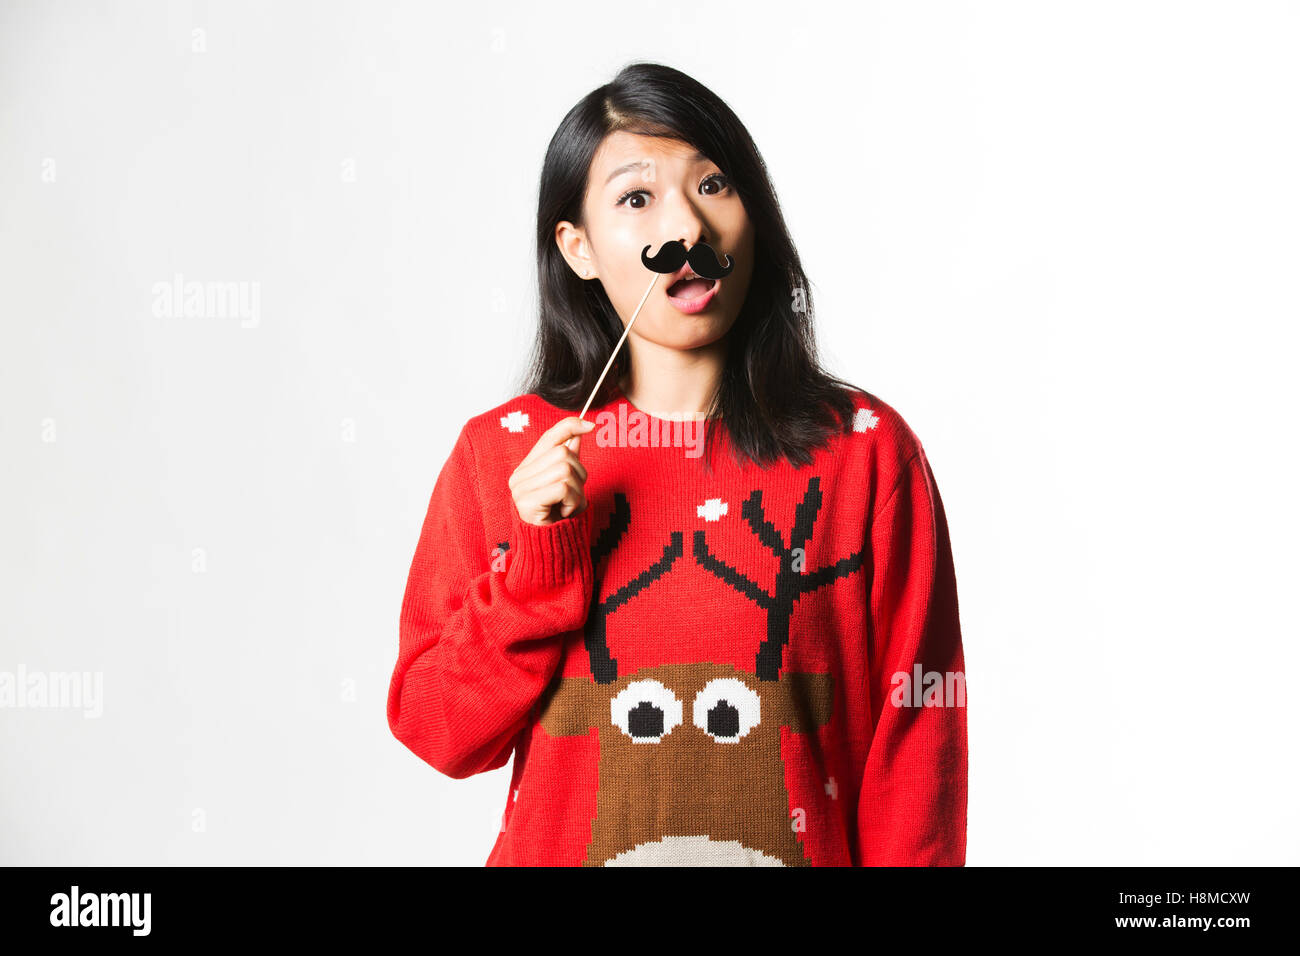 Portrait of woman in Christmas sweater standing with fake moustache Stock Photo